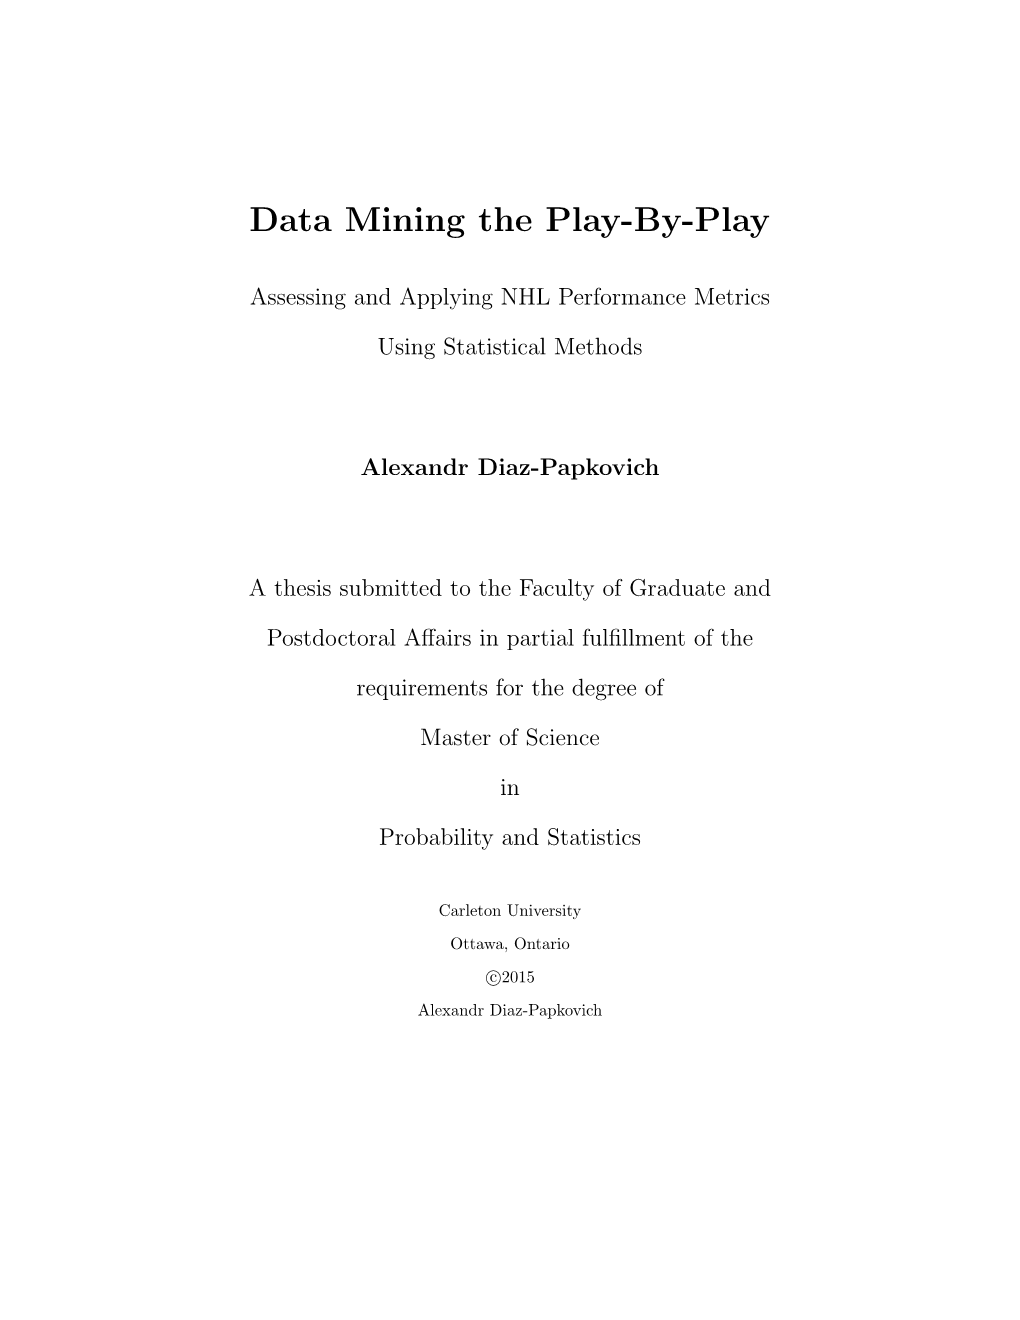 Data Mining the Play-By-Play